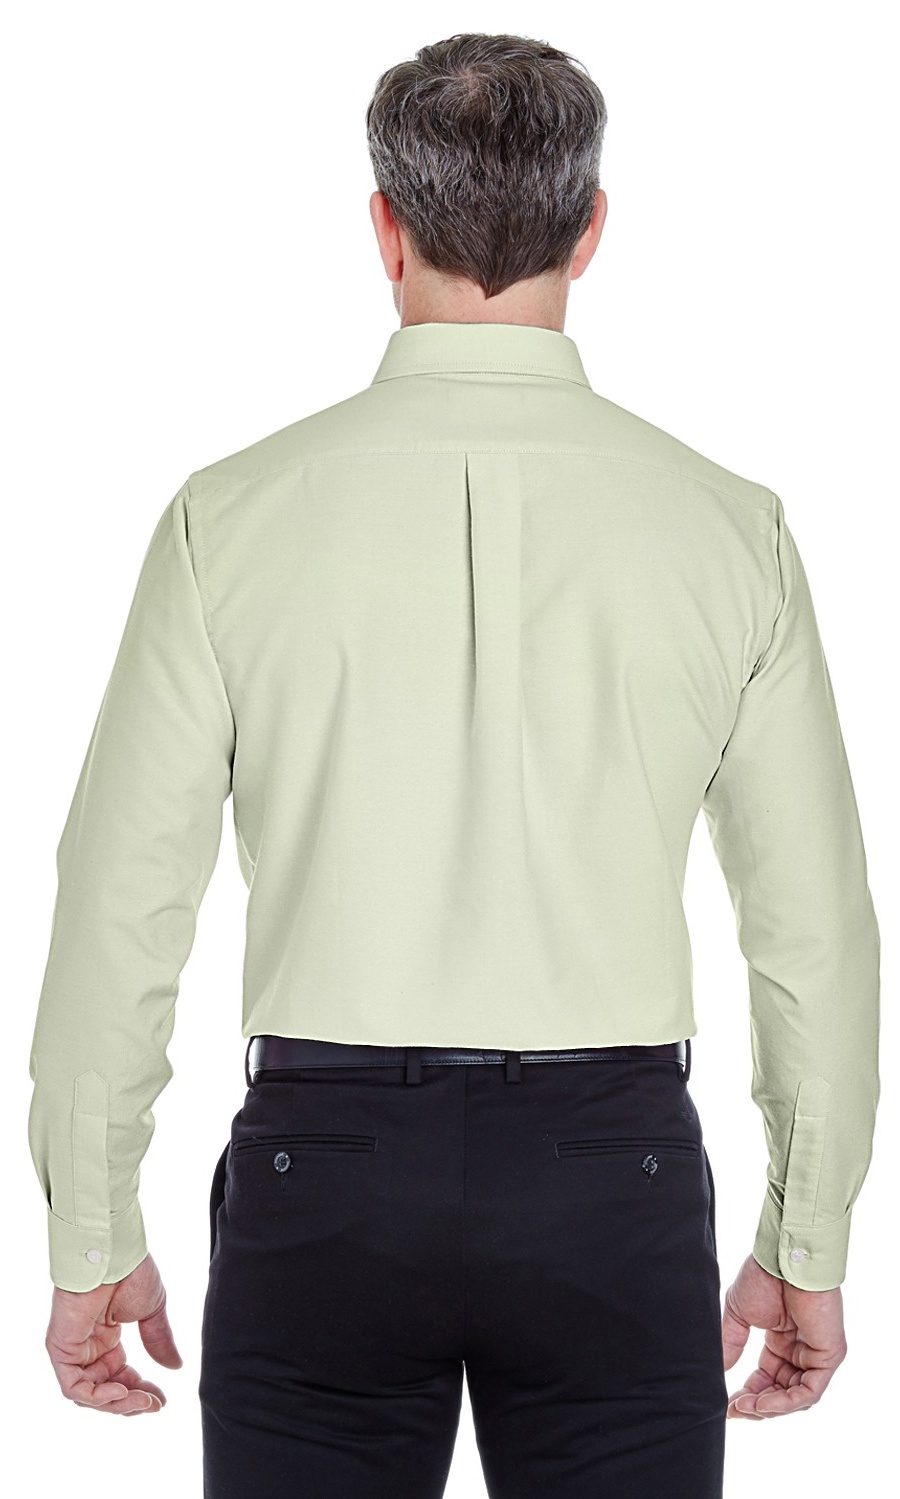 UltraClub 8970 Men's Classic Wrinkle-Resistant Long-Sleeve Oxford - image 2 of 3